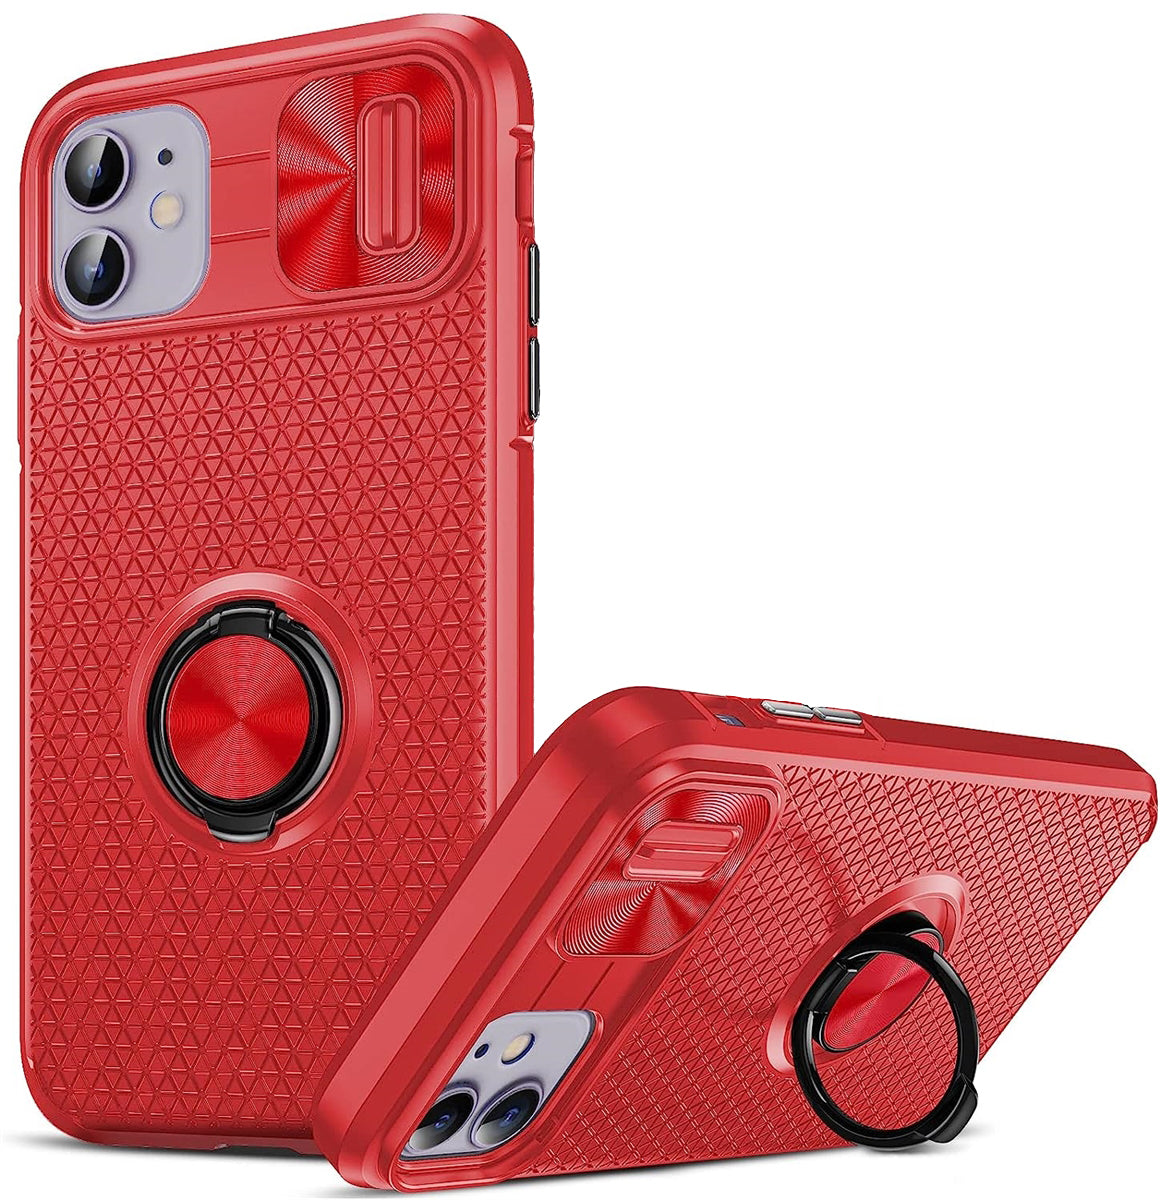 For Apple iPhone 12/12 Pro Autofocus Slide Camera Cover Ring Case Red